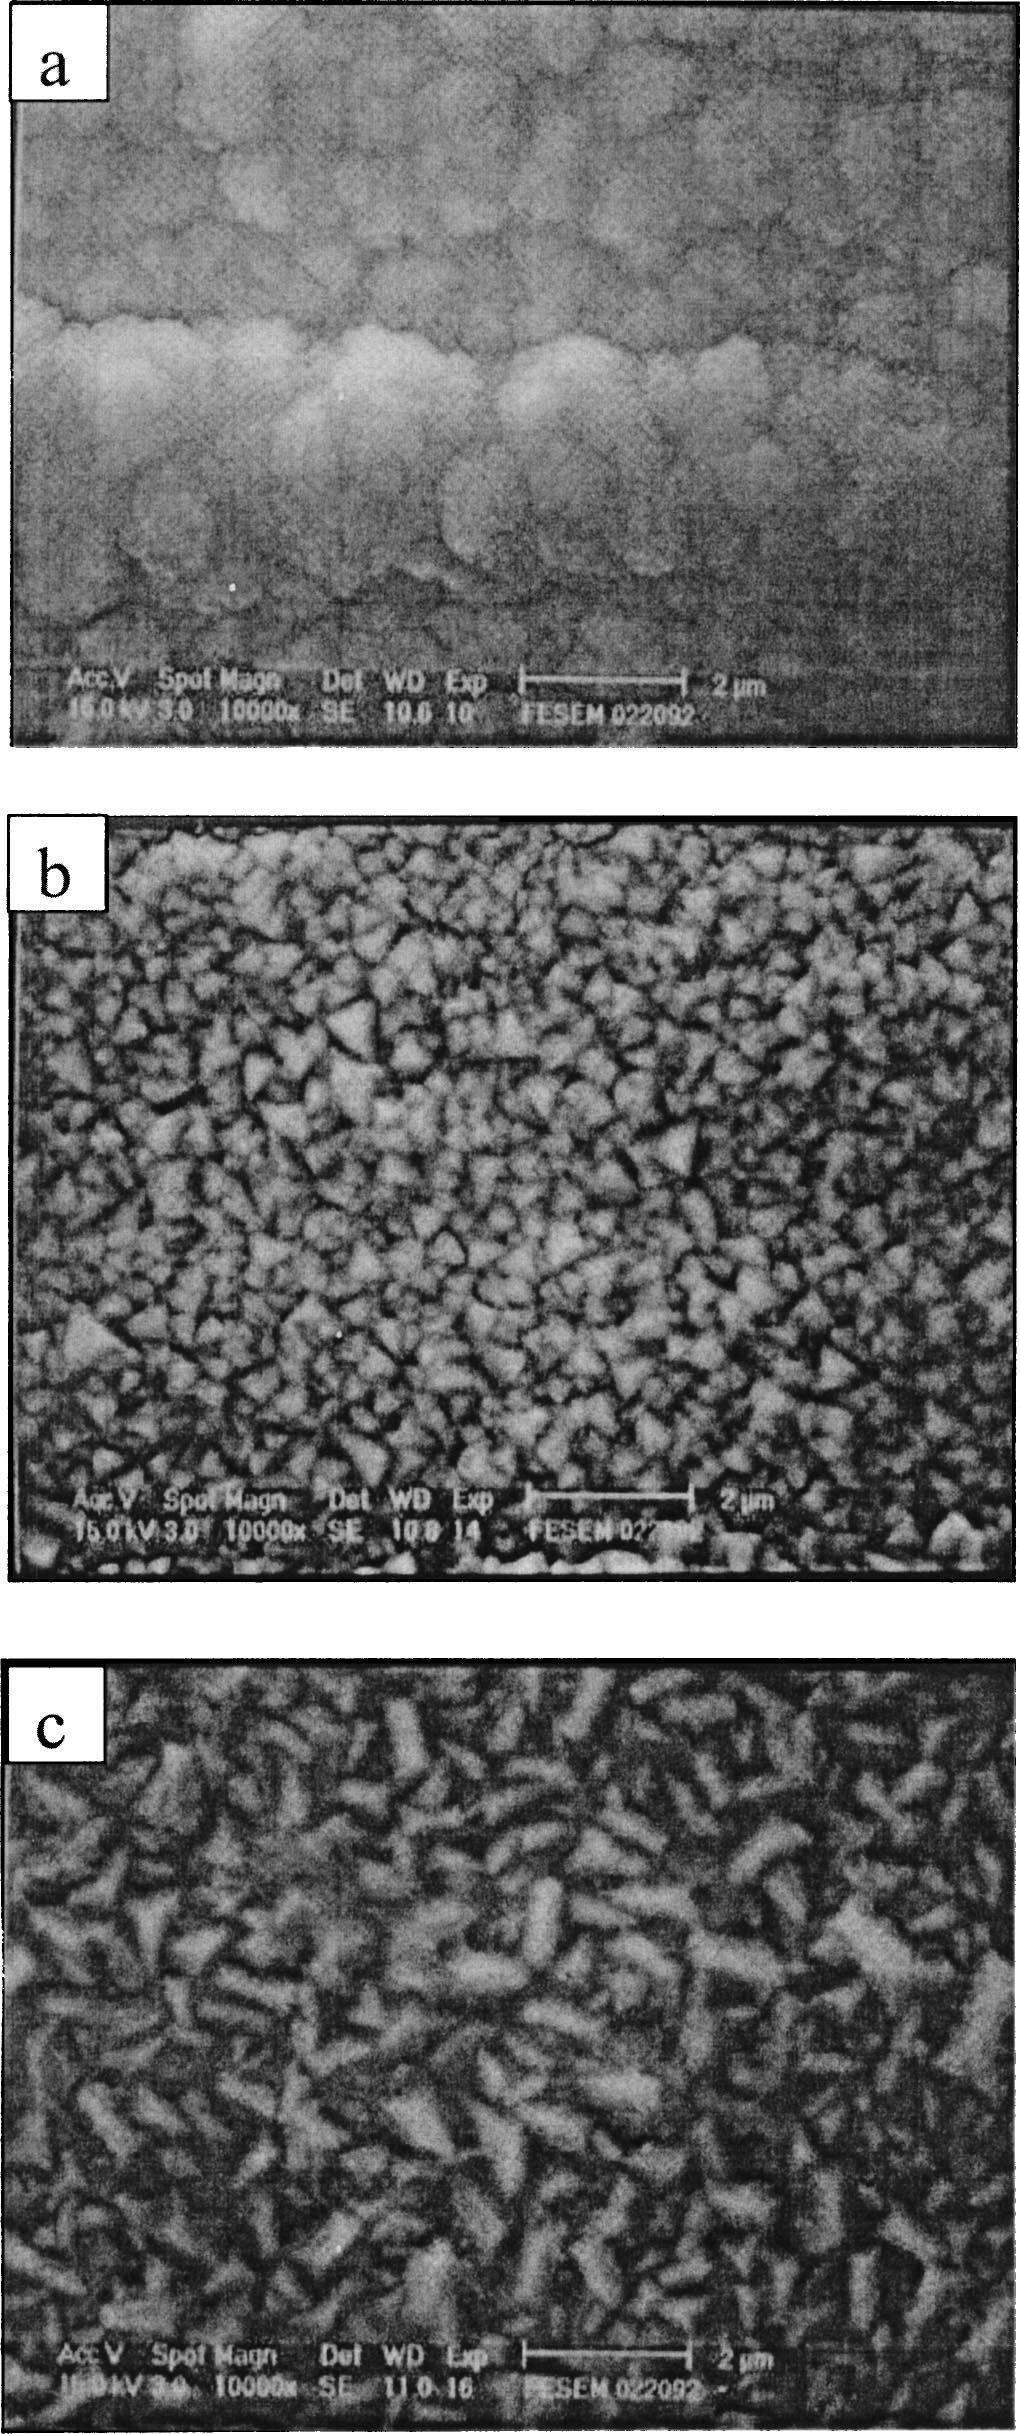 C13 Figure 10. Variation of the iron content, determined by EDS, in the Zn-Fe alloy as a function of deposition potential for the electrodeposits produced from a 40.0-60.